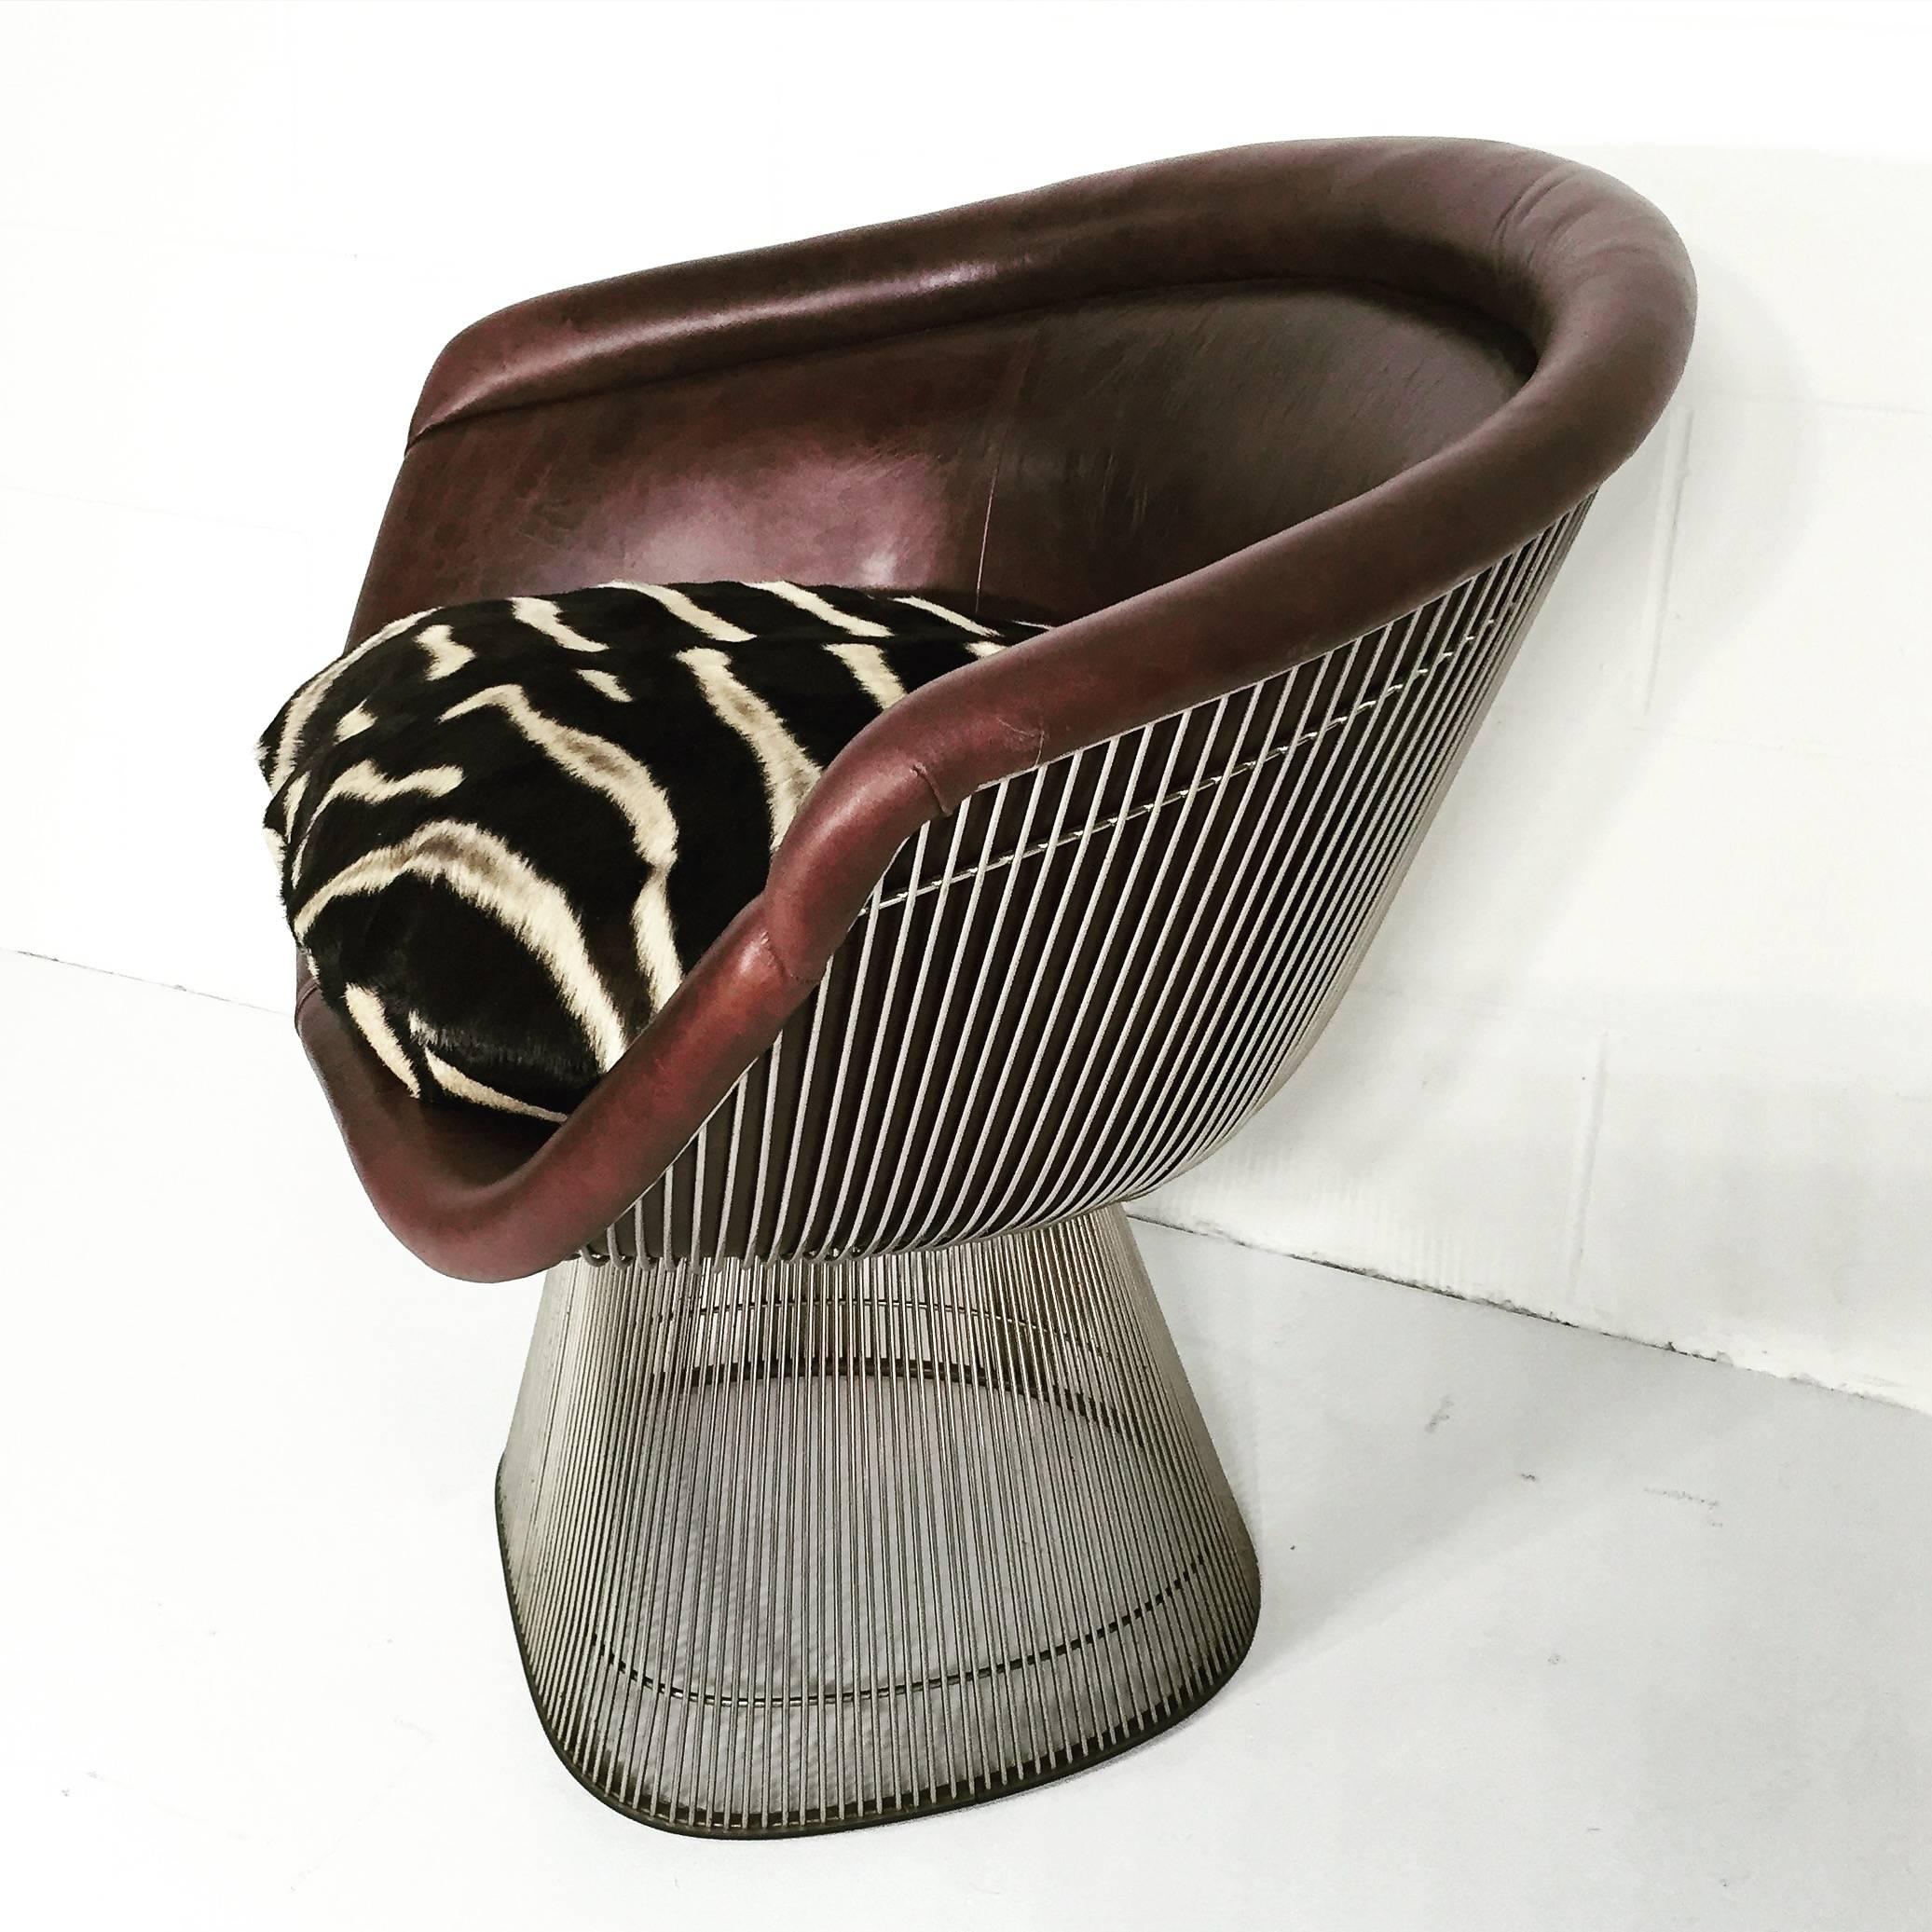 A collector’s item! Released by Knoll in 1966, Platner’s iconic chair lends Mid-Century cool to any room. We chose our signature Forsyth leather so the incredible frame would catch the eye from all angles. A down-filled zebra hide pillow makes for a